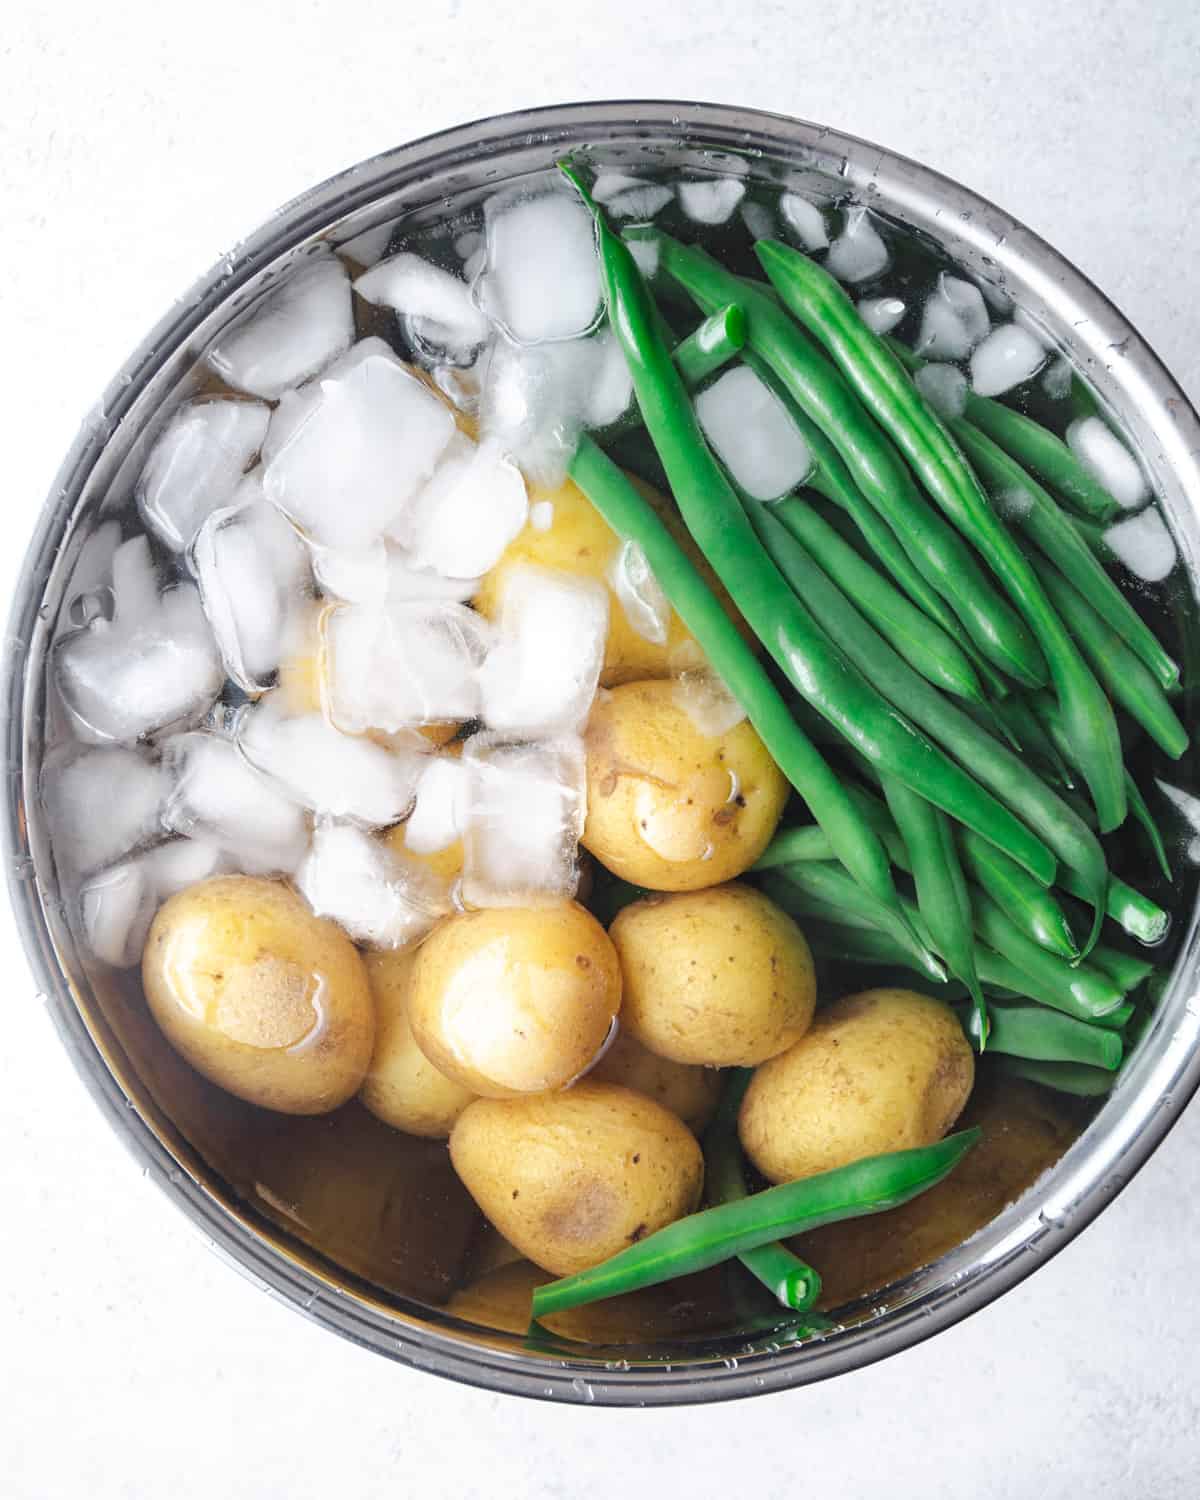 green beans and potatoes in a metal mixing bowl with ice